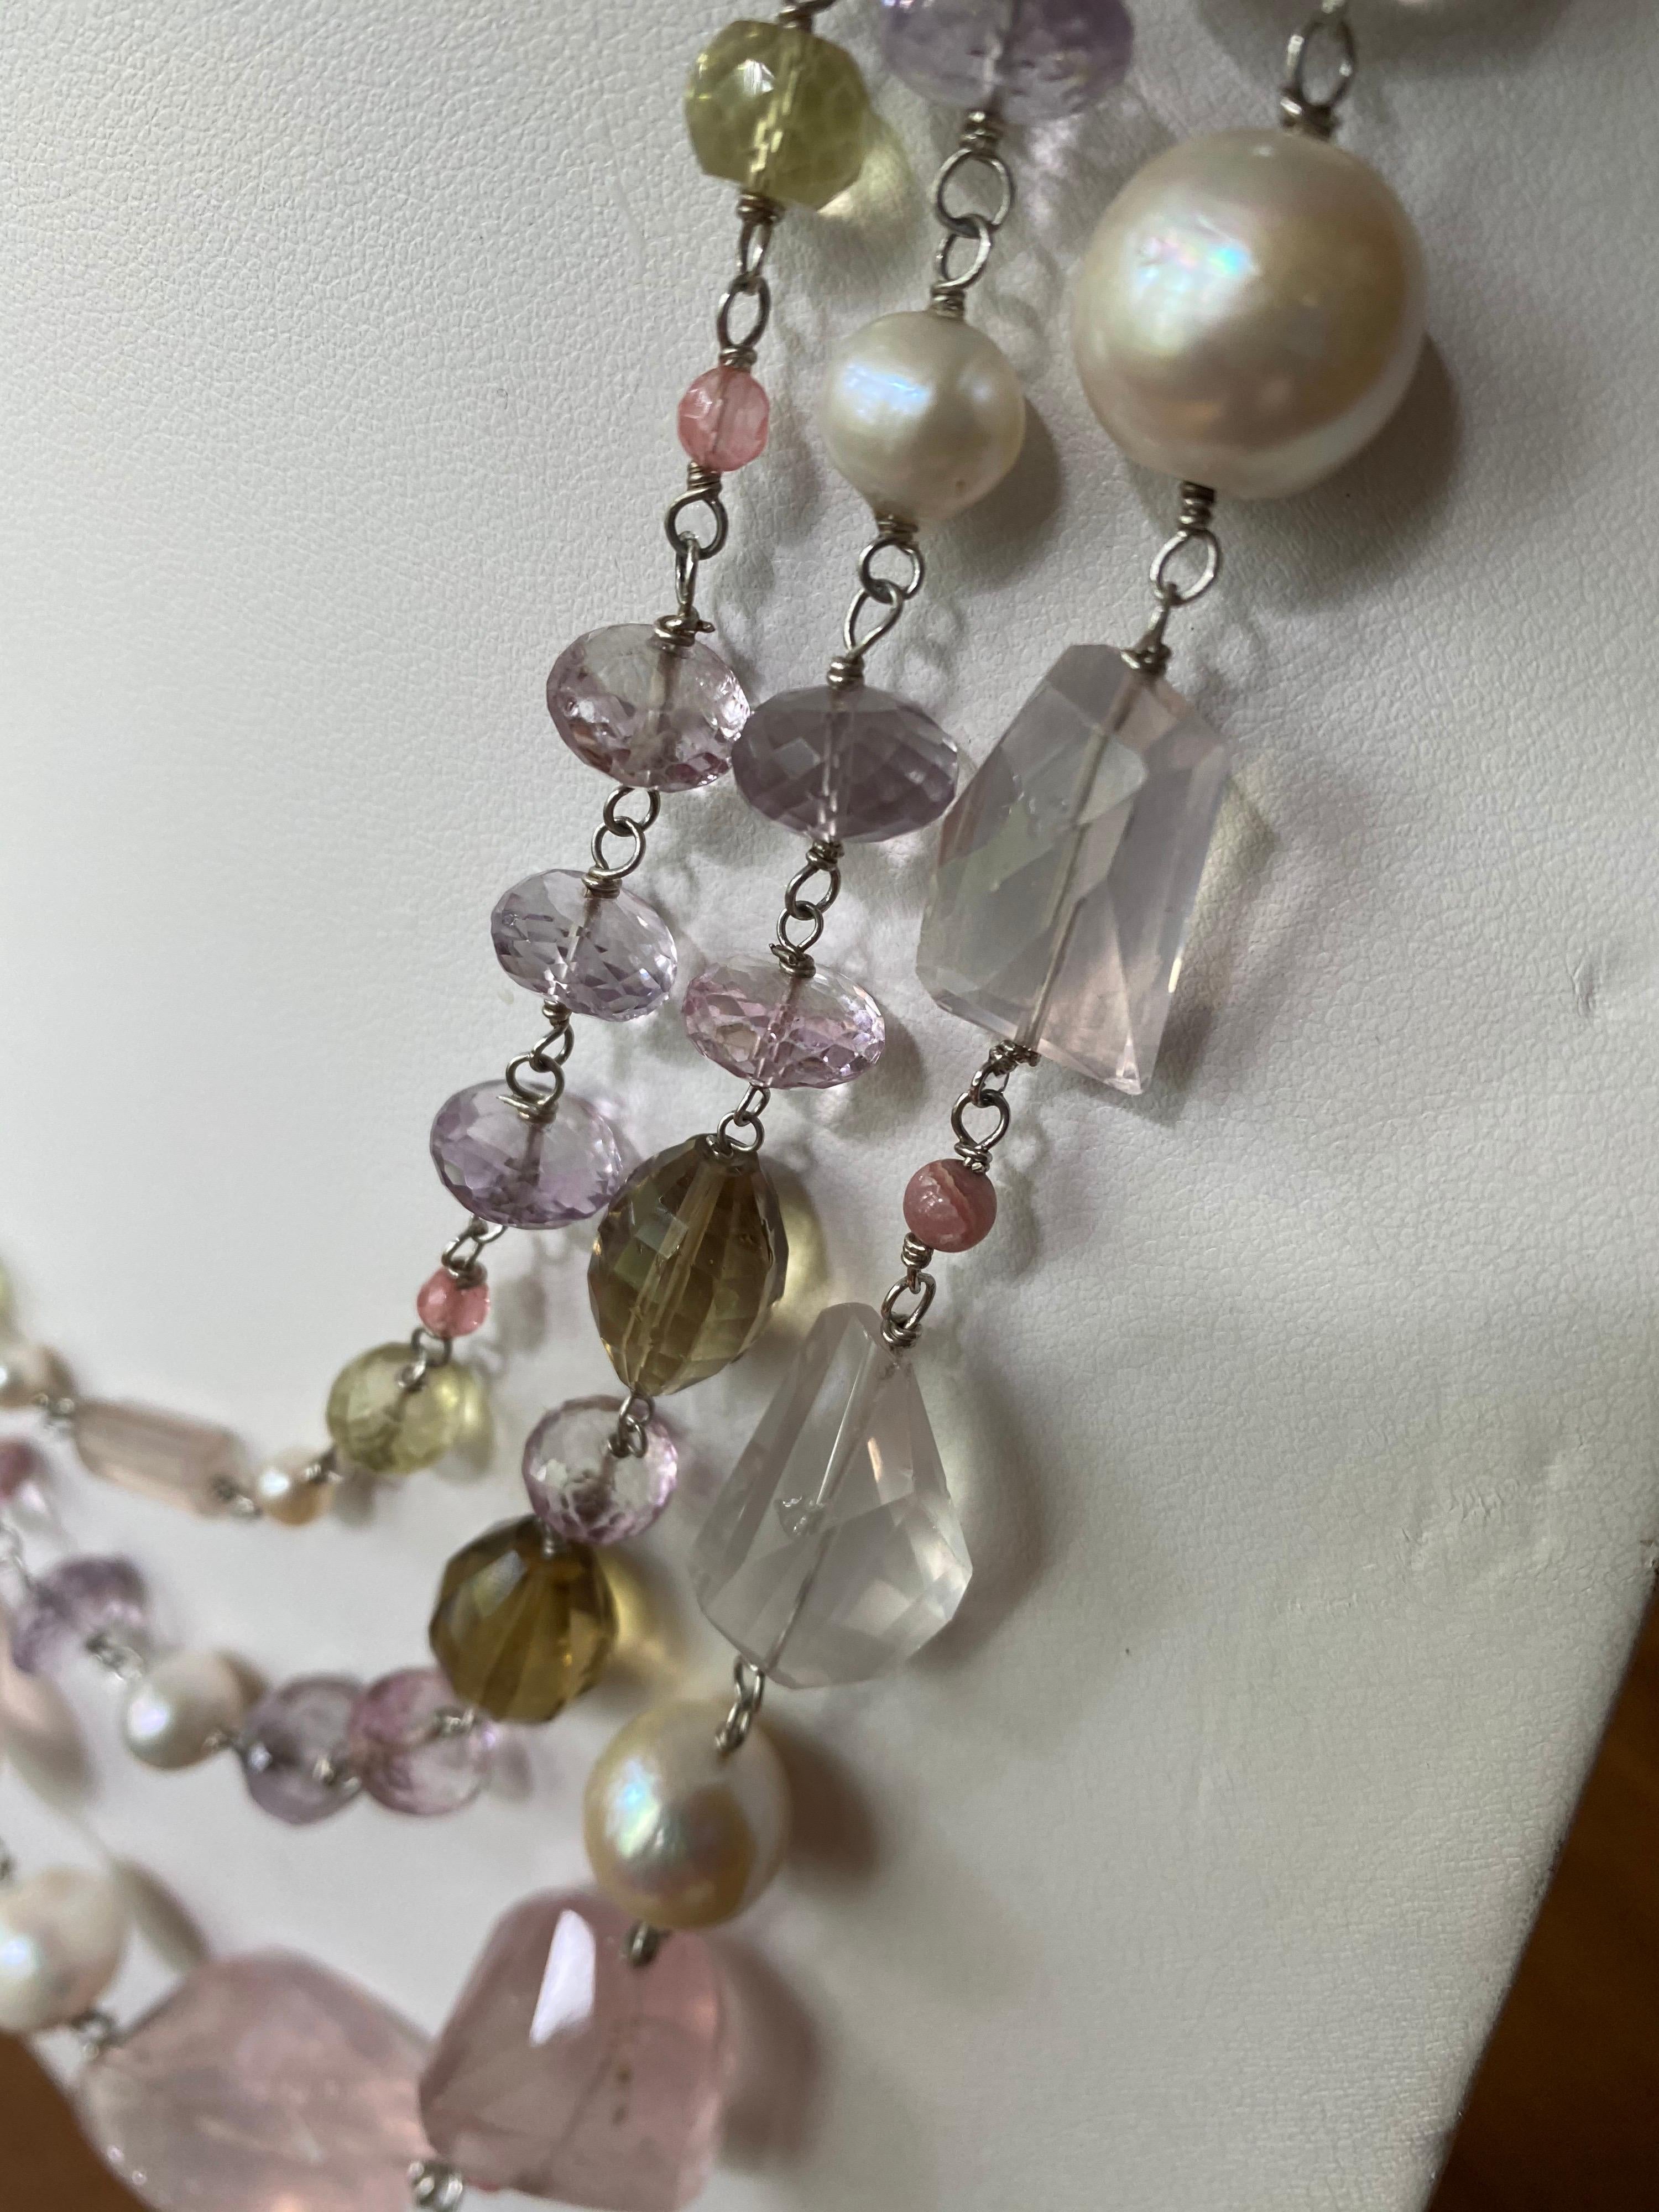 Jane Magon Collections delightful Three Strands of Rose Quartz, Lemon Citrines, Beer Quartz, Pink Topaz, Pink Amethyst Faceted Rndelles, Freshwater Pearls, and a large Wide Pear Shaped Lemon Citrine set in the Sterling Silver Clasp. Add this to your